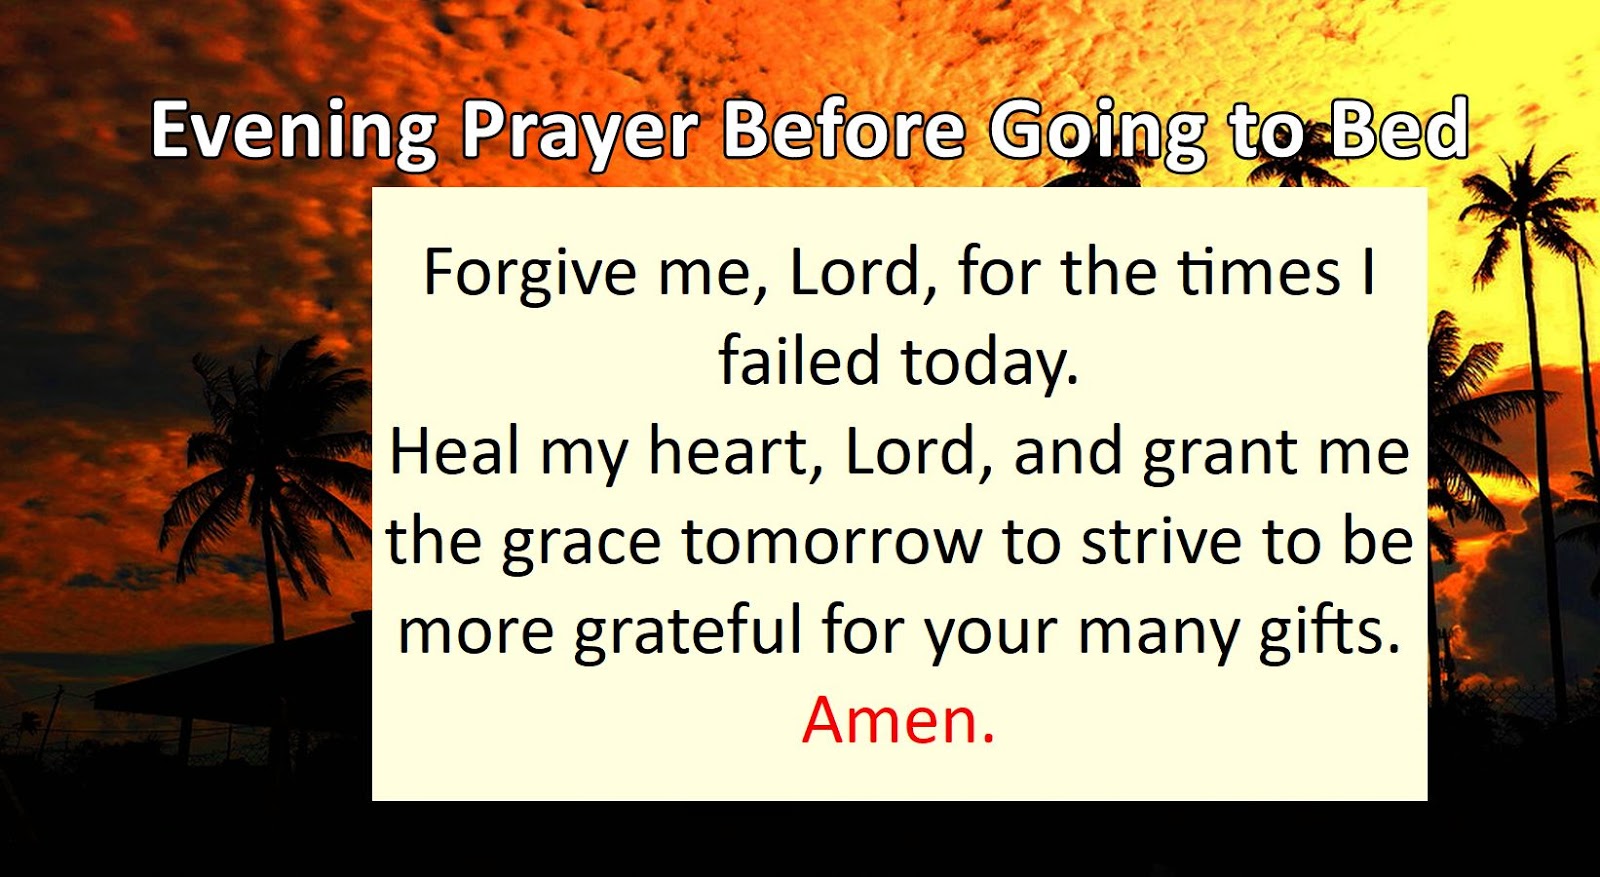 Evening Prayer Before Going to Bed!